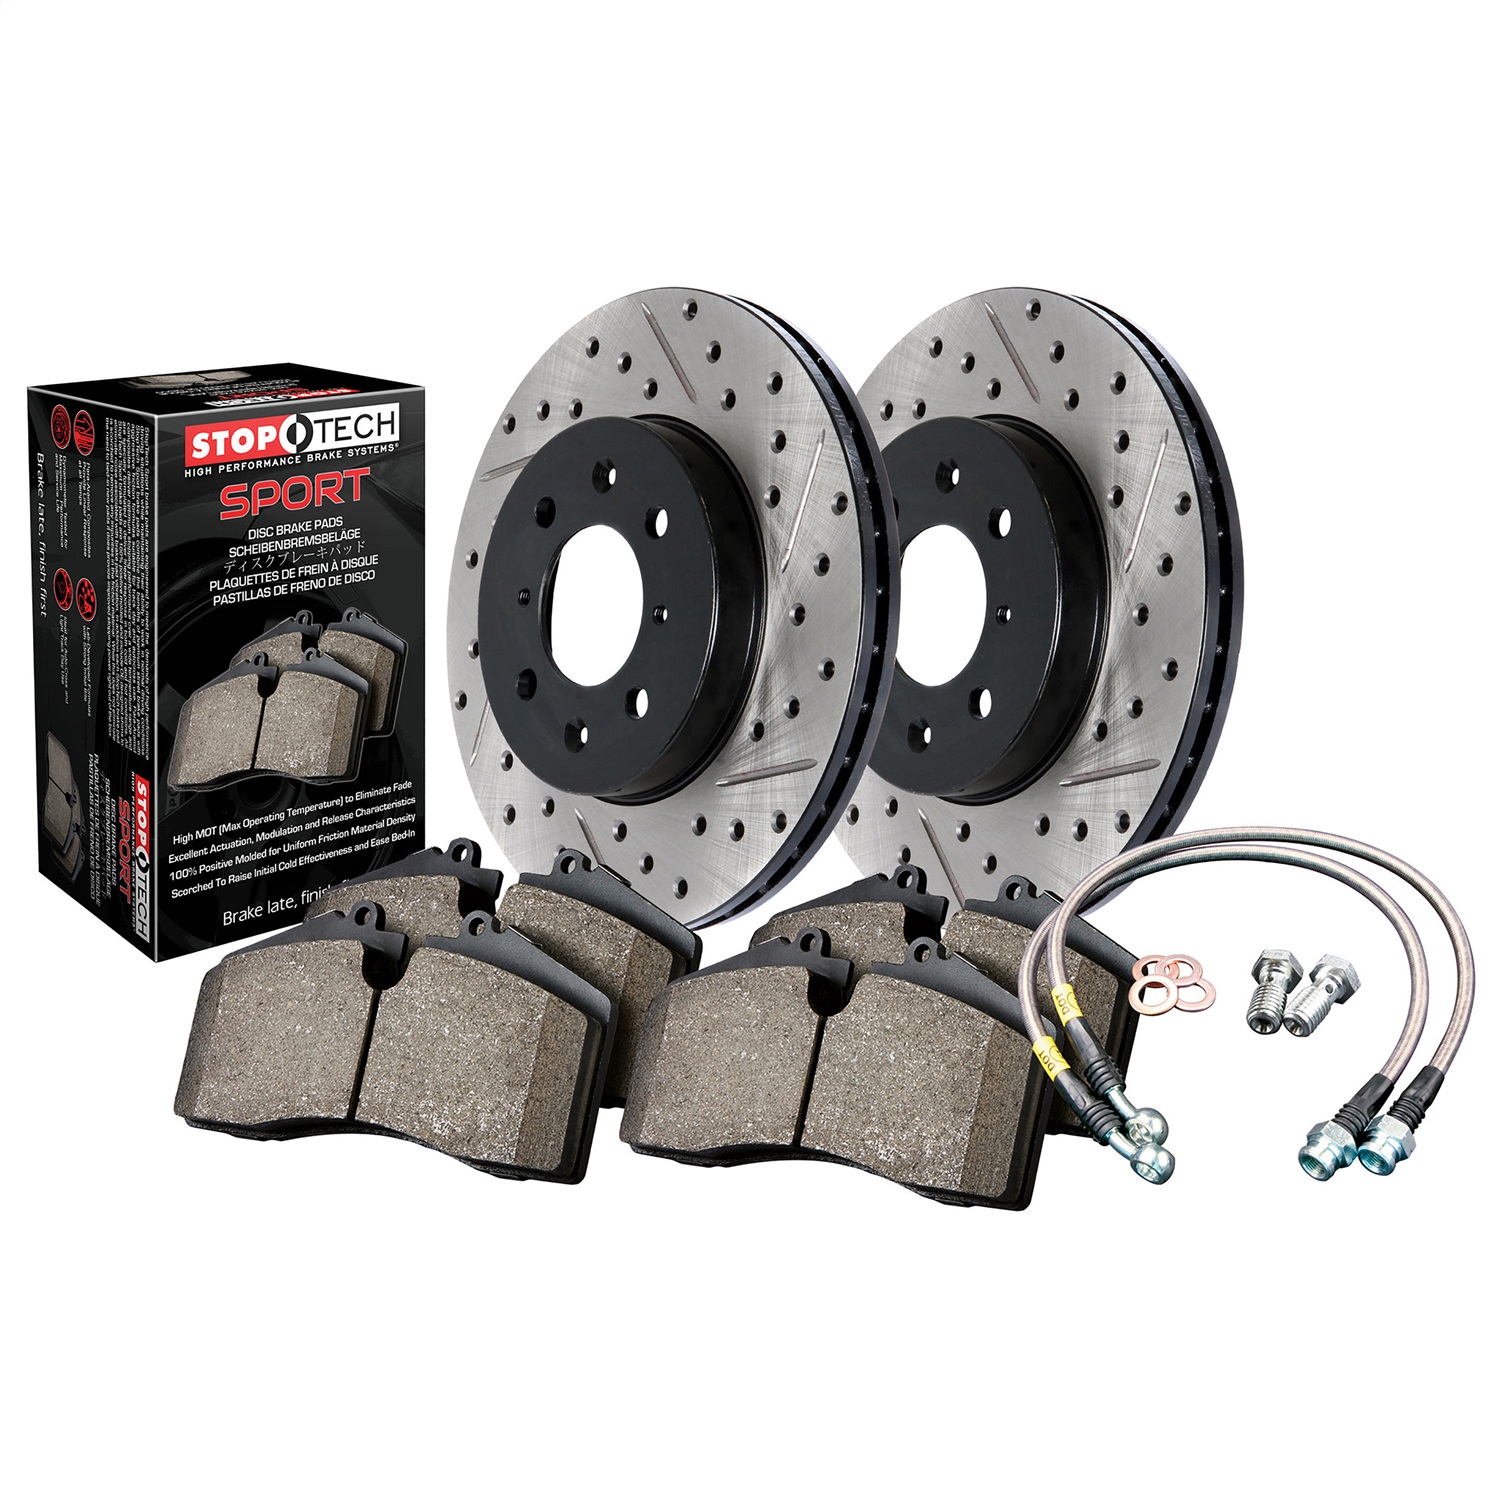 StopTech 978.44013F Sport Disc Brake Kit w/Cross-Drilled And Slotted Rotors